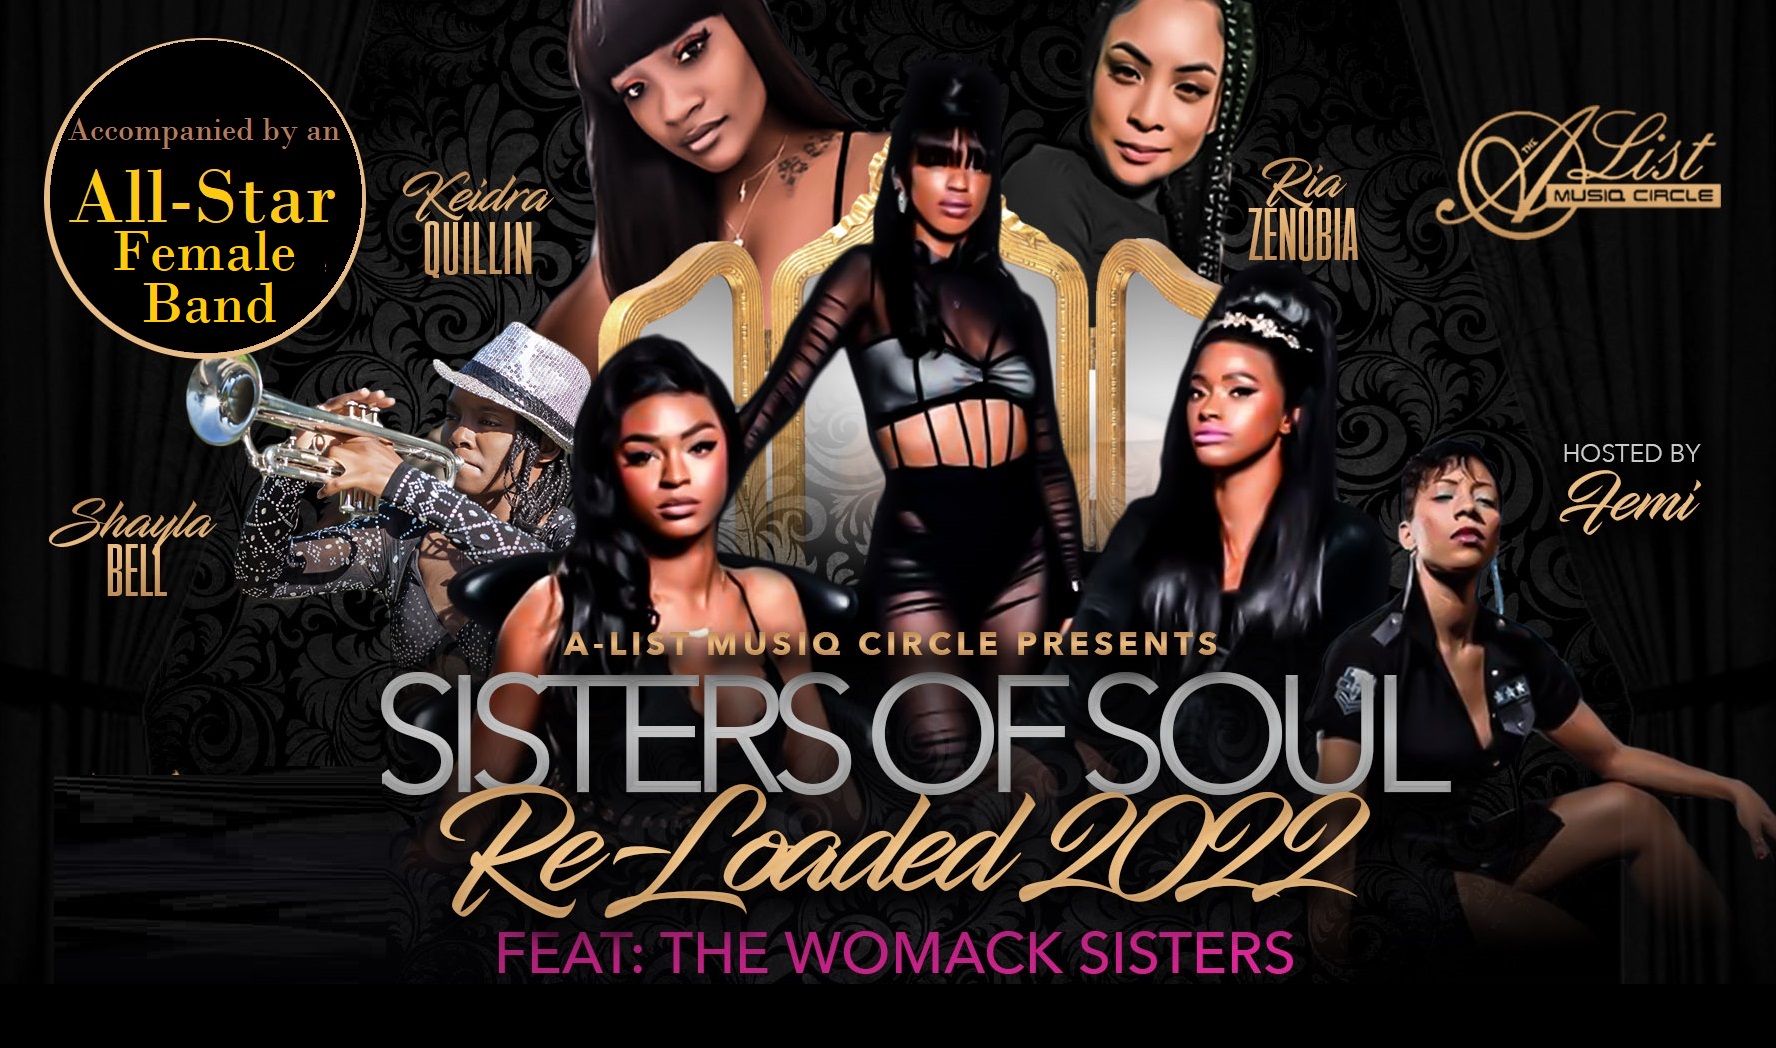 Image for SISTERS OF SOUL RE-LOADED